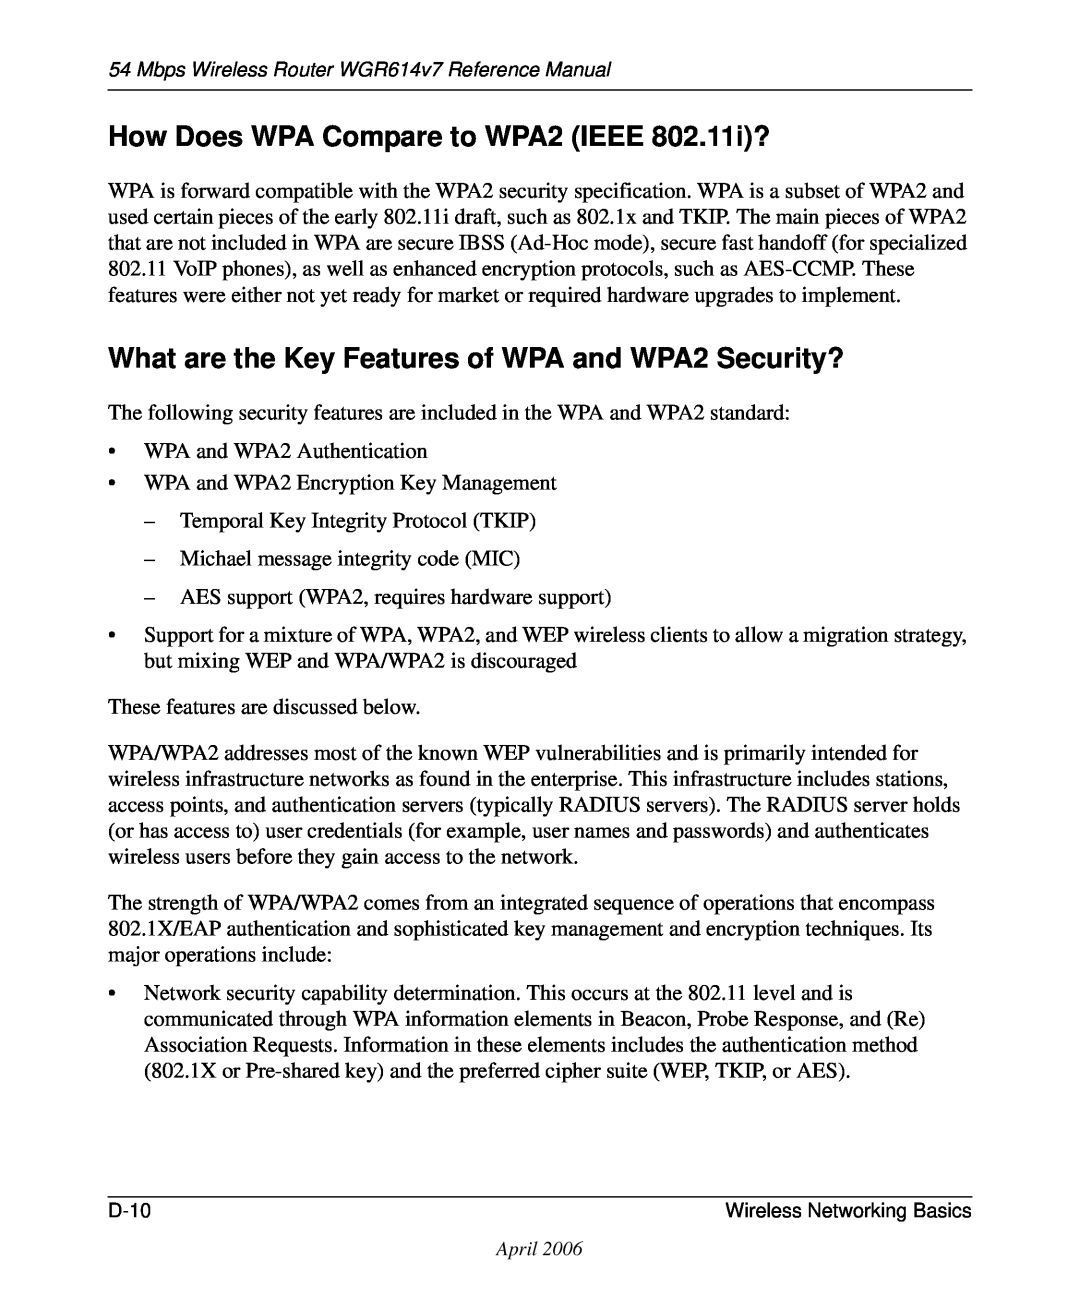 NETGEAR WGR614v7 manual How Does WPA Compare to WPA2 IEEE 802.11i?, What are the Key Features of WPA and WPA2 Security? 